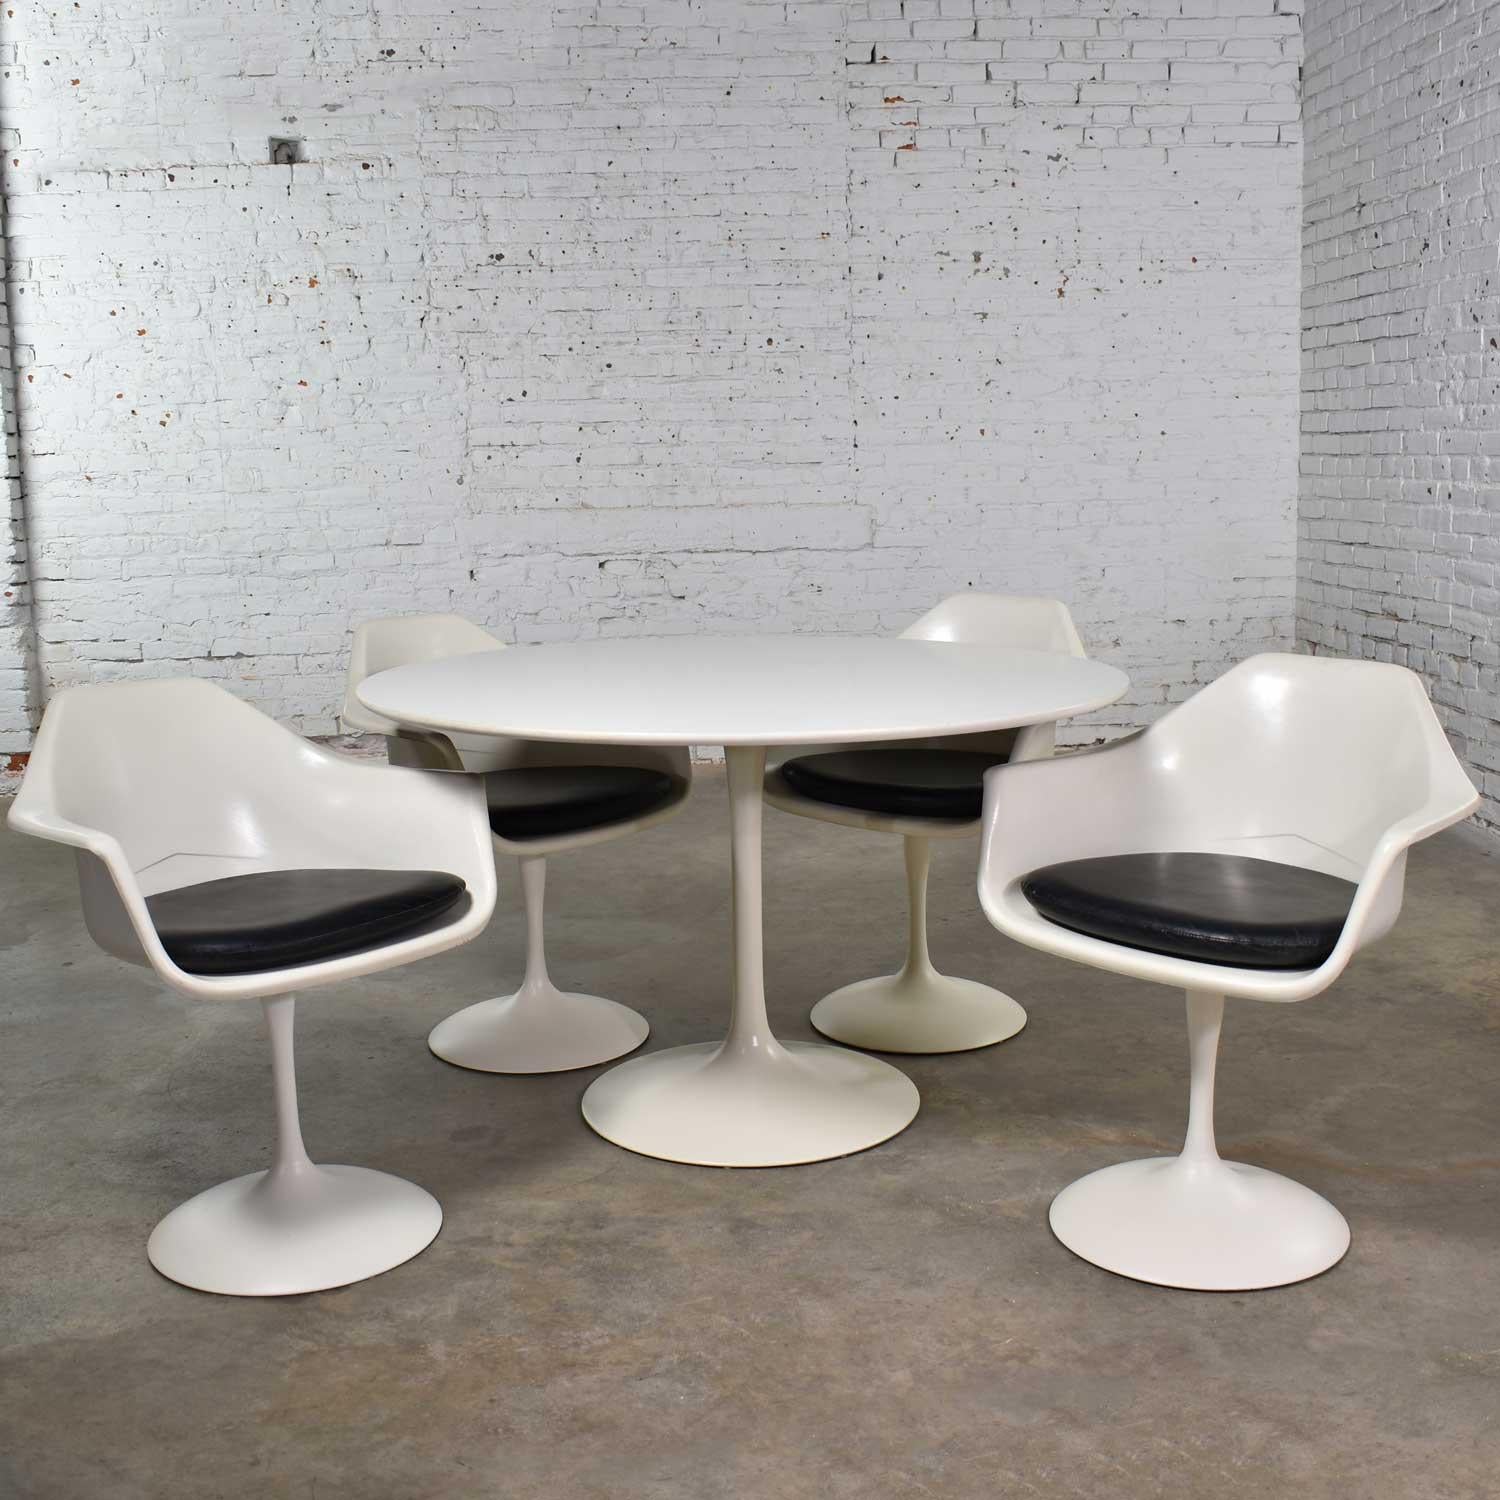 American Tulip Style White Fiberglass Swivel Chairs and Table by Umanoff for Contemporary